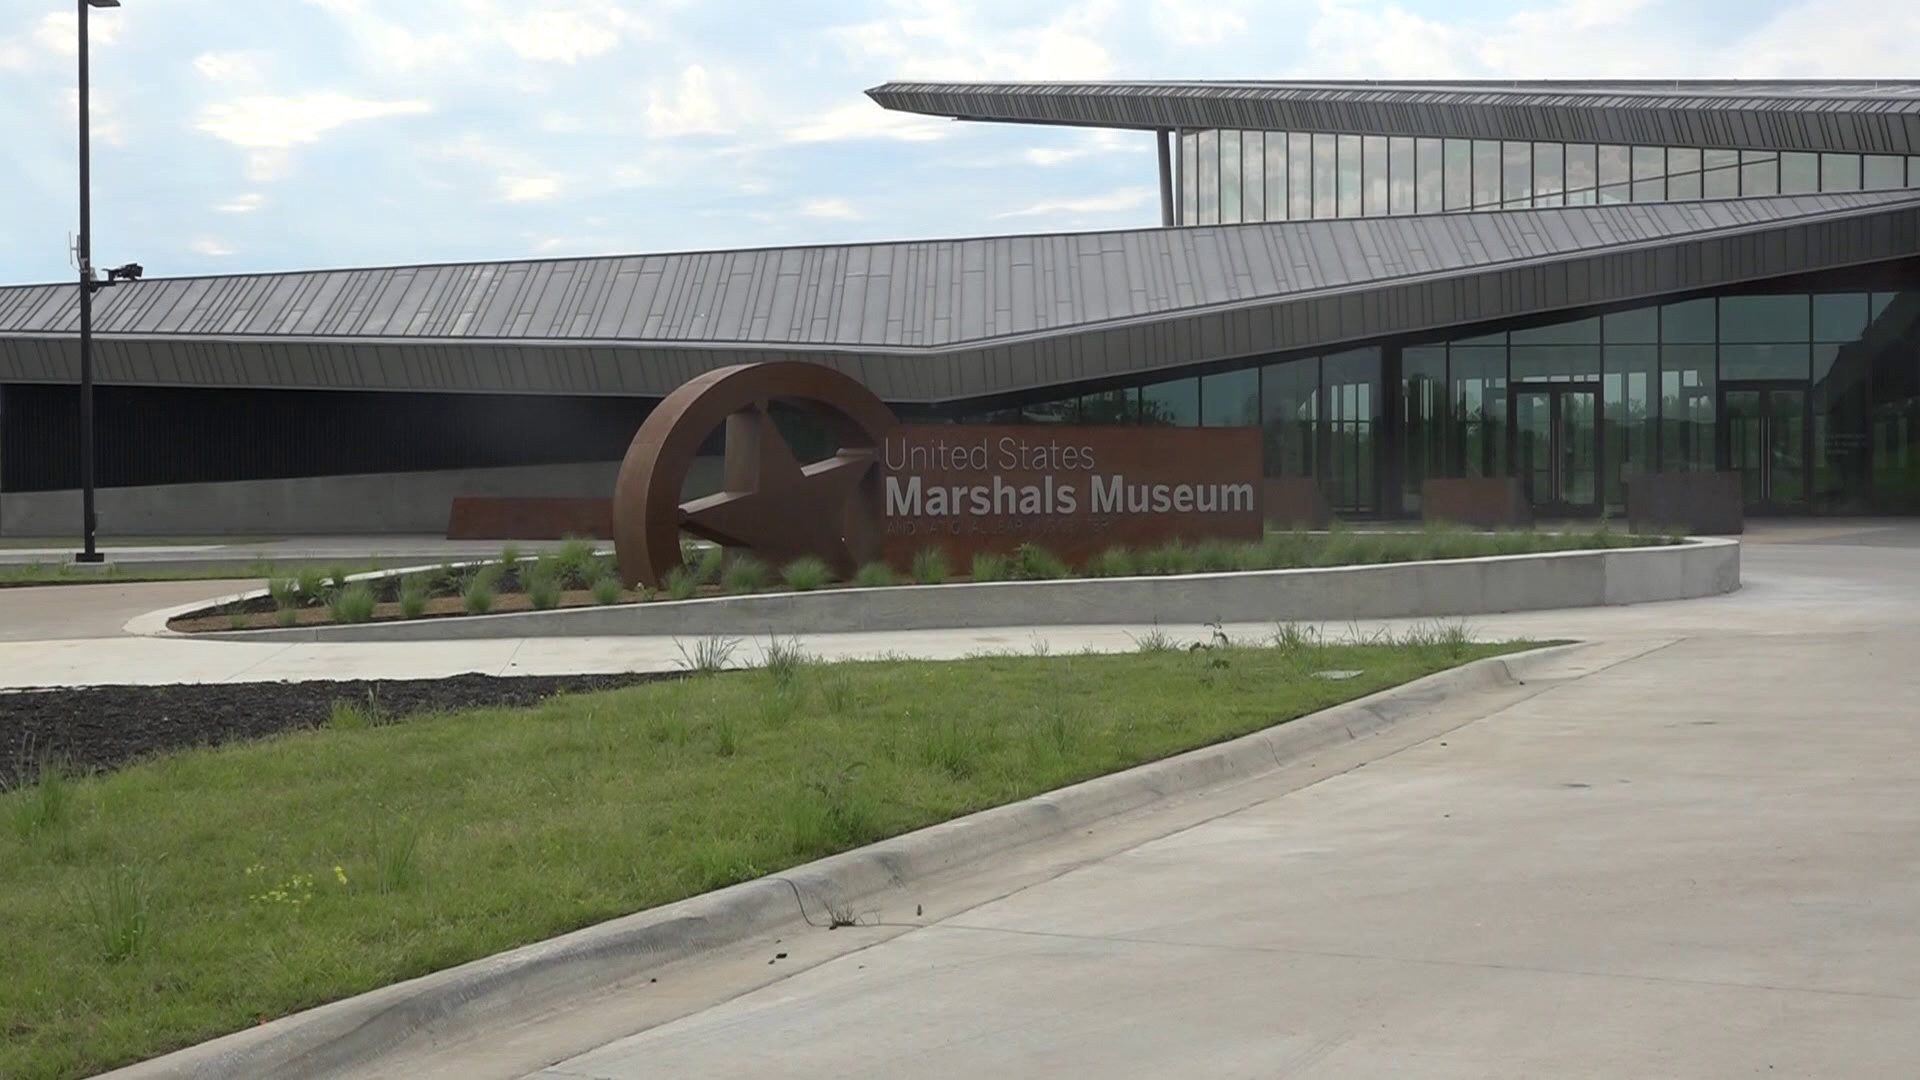 A new President and C.E.O at the U.S. Marshals Museum in Fort Smith starts August 22nd.  Daren speaks with Ben Johnson about his goals.